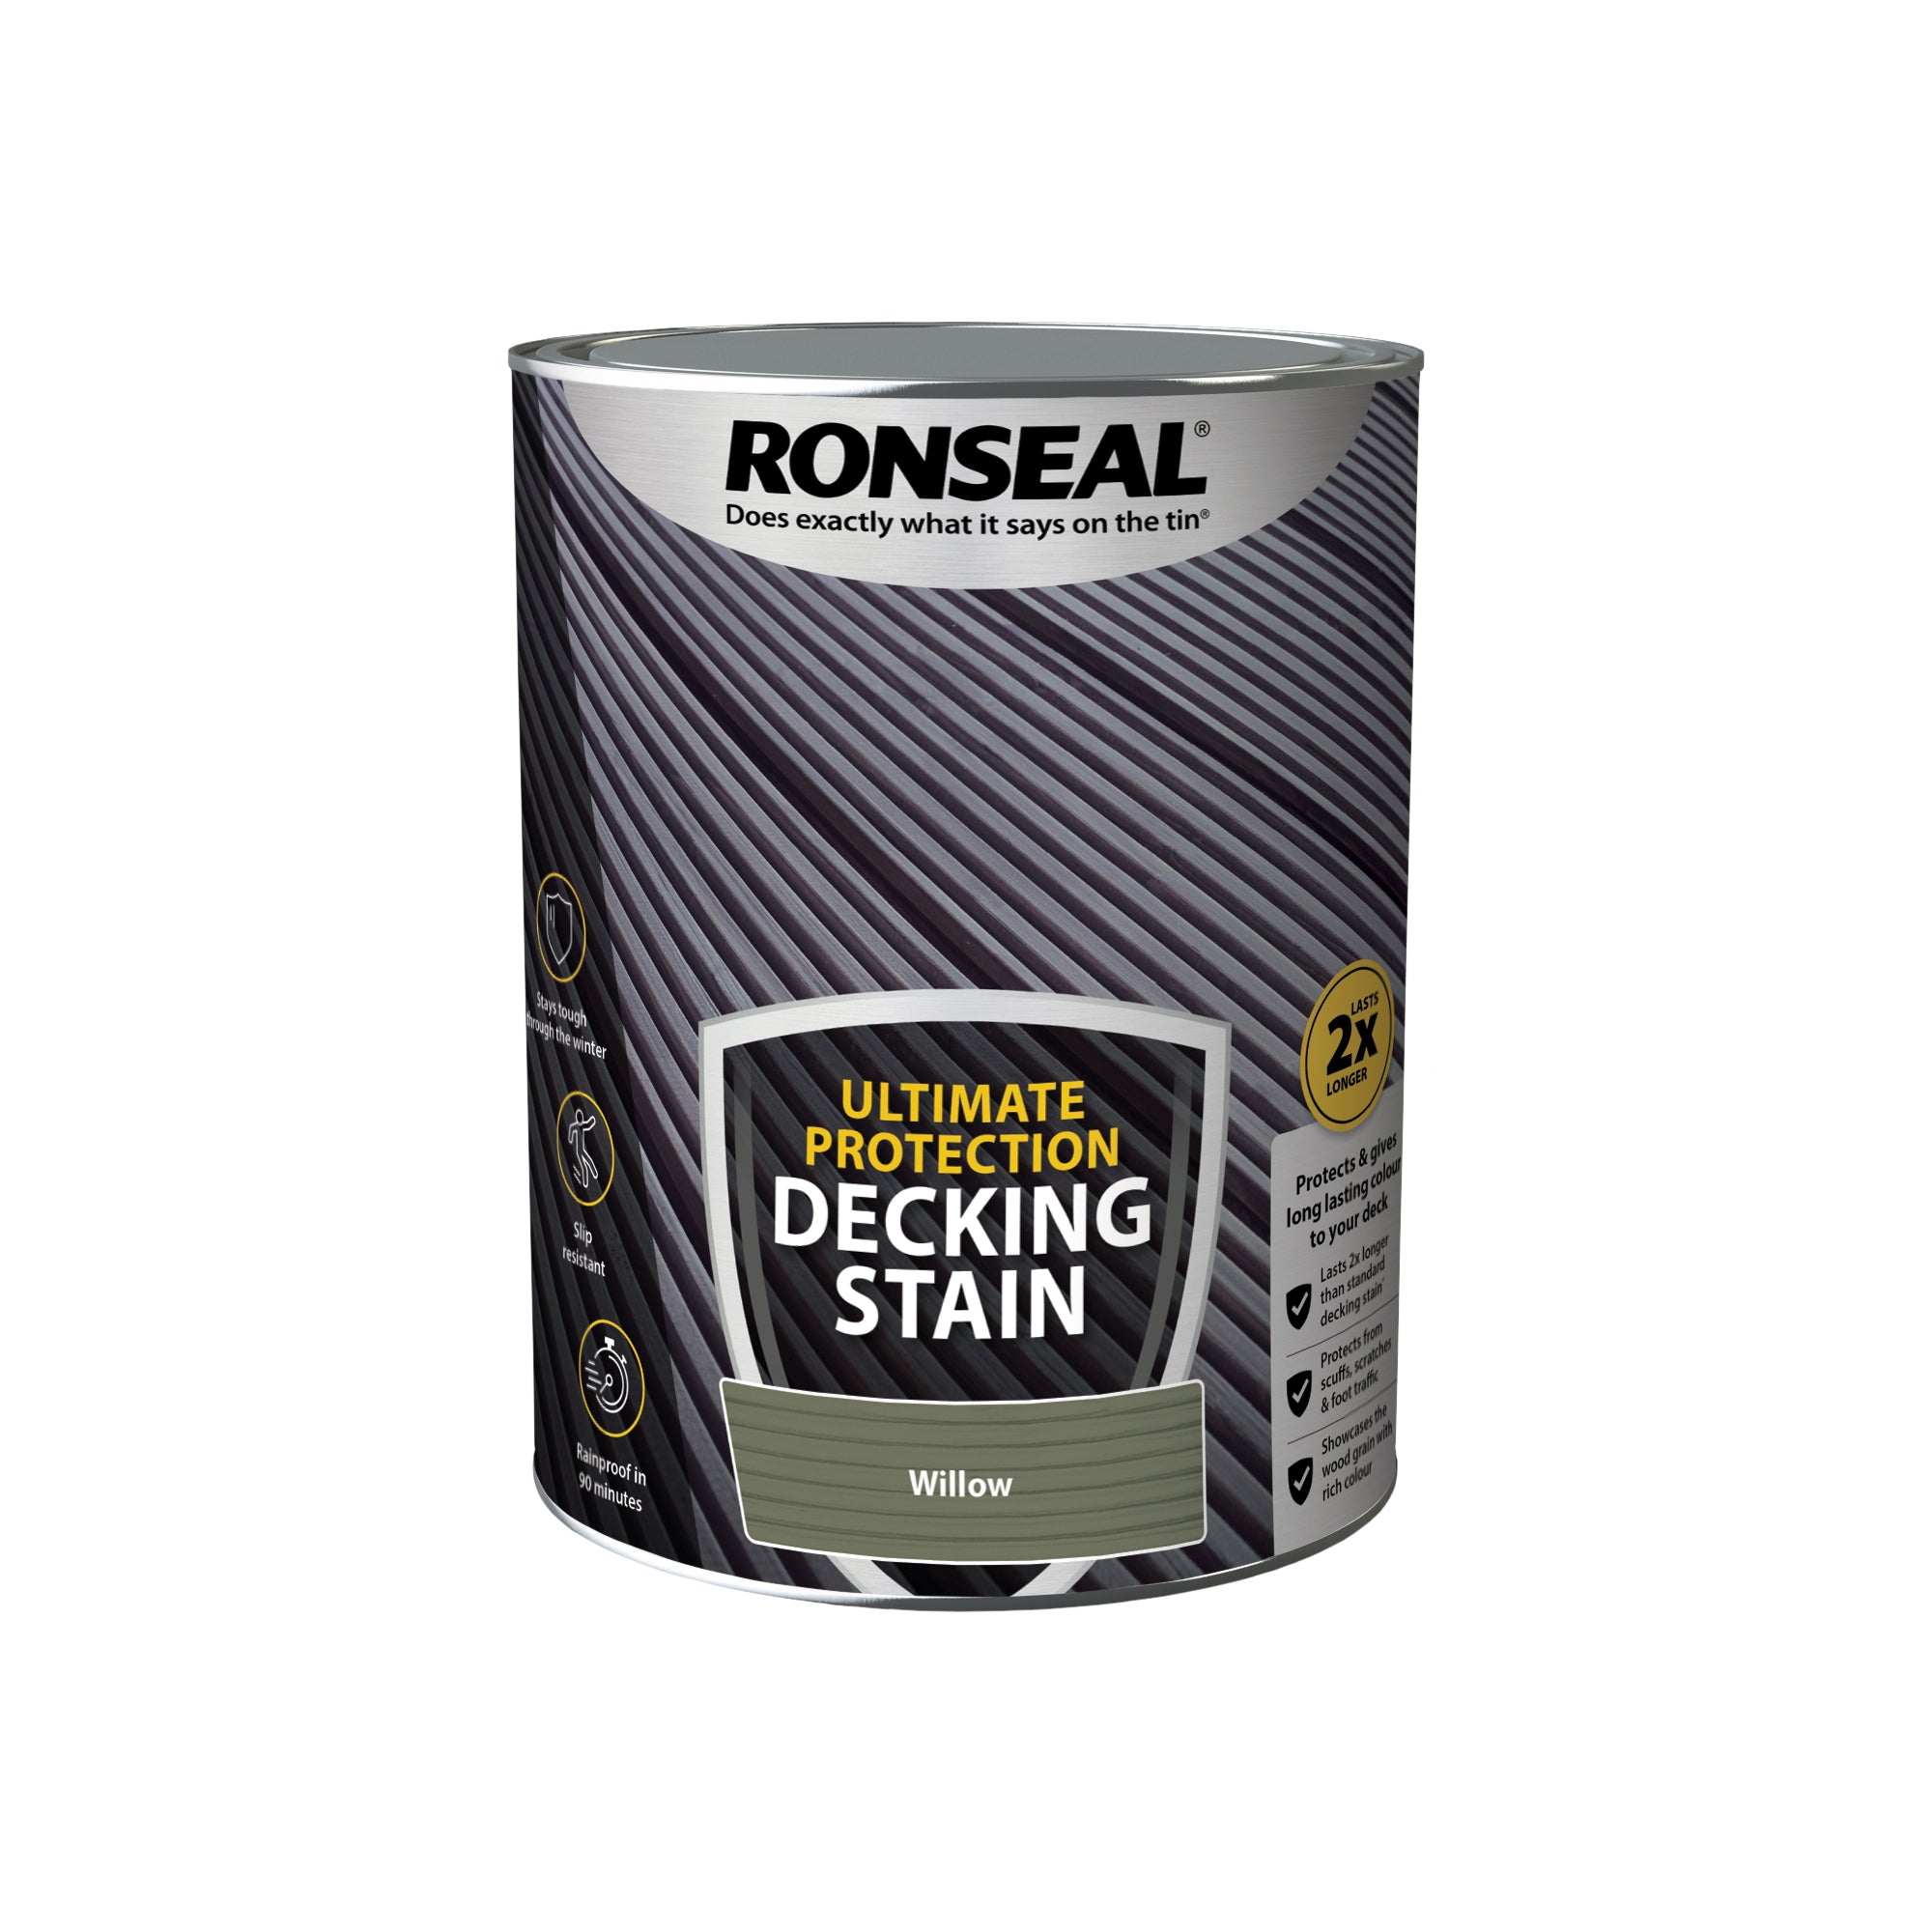 Ronseal-Ultimate-Protection-Decking-Stain-Willow-5L